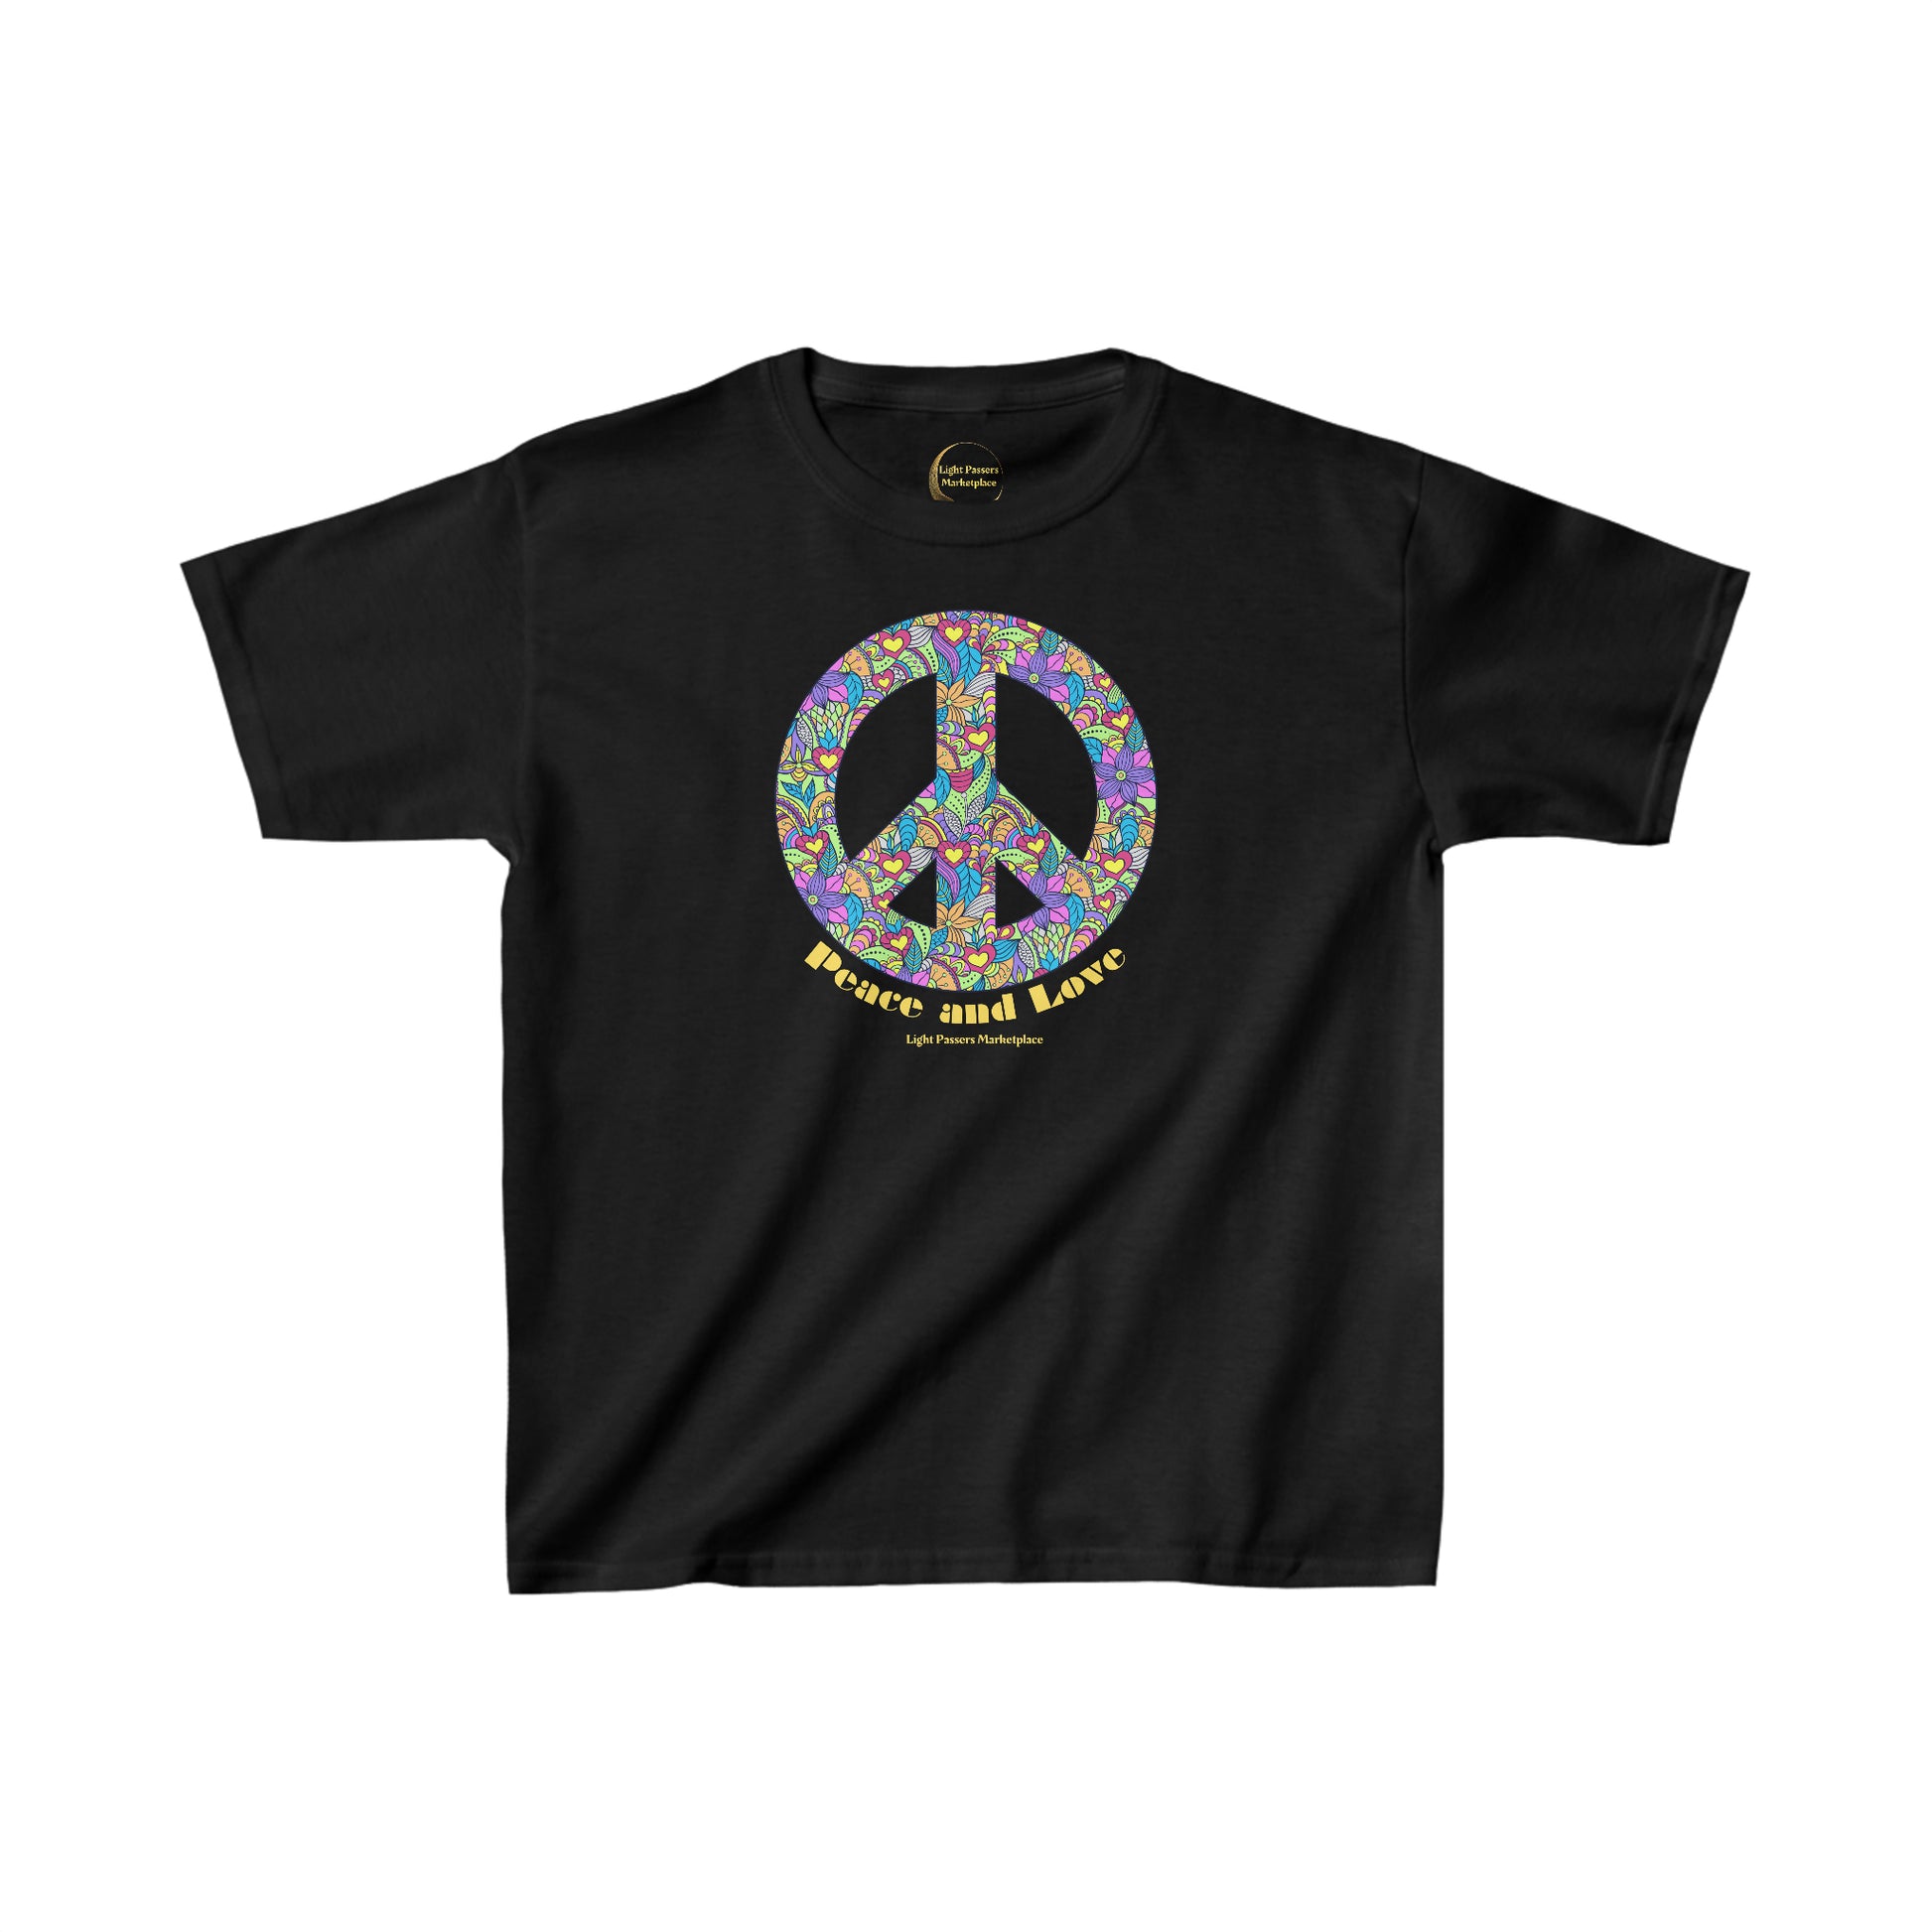 A black youth t-shirt featuring a peace sign adorned with colorful flowers. Made of 100% cotton with twill tape shoulders for durability and ribbed collar for curl resistance. Ethically sourced and Oeko-Tex certified.